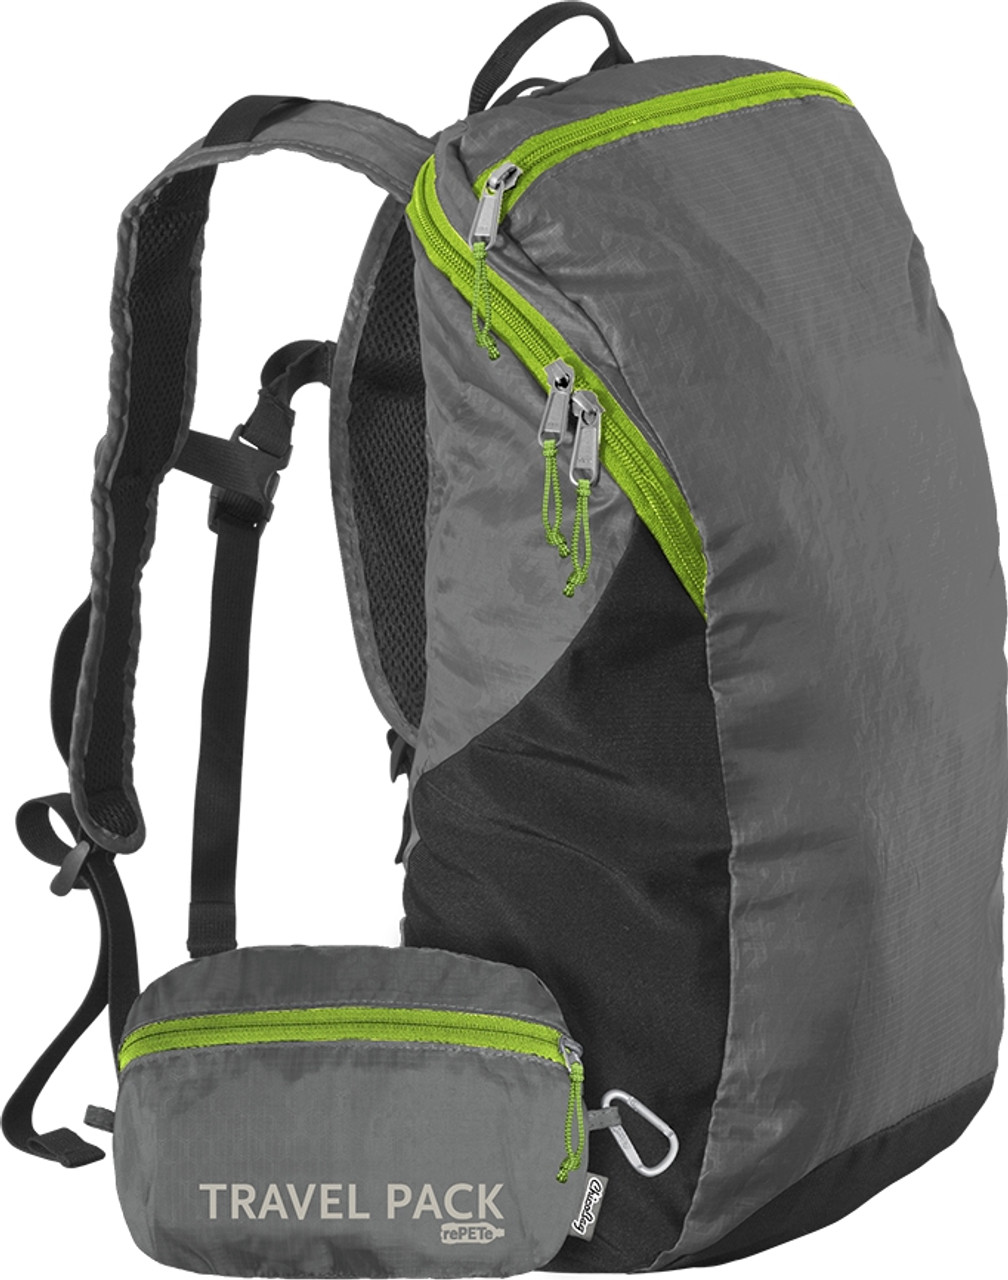 ChicoBag Travel Pack Backpack - Compact, Comfortable, Lightweight, Machine  Washable